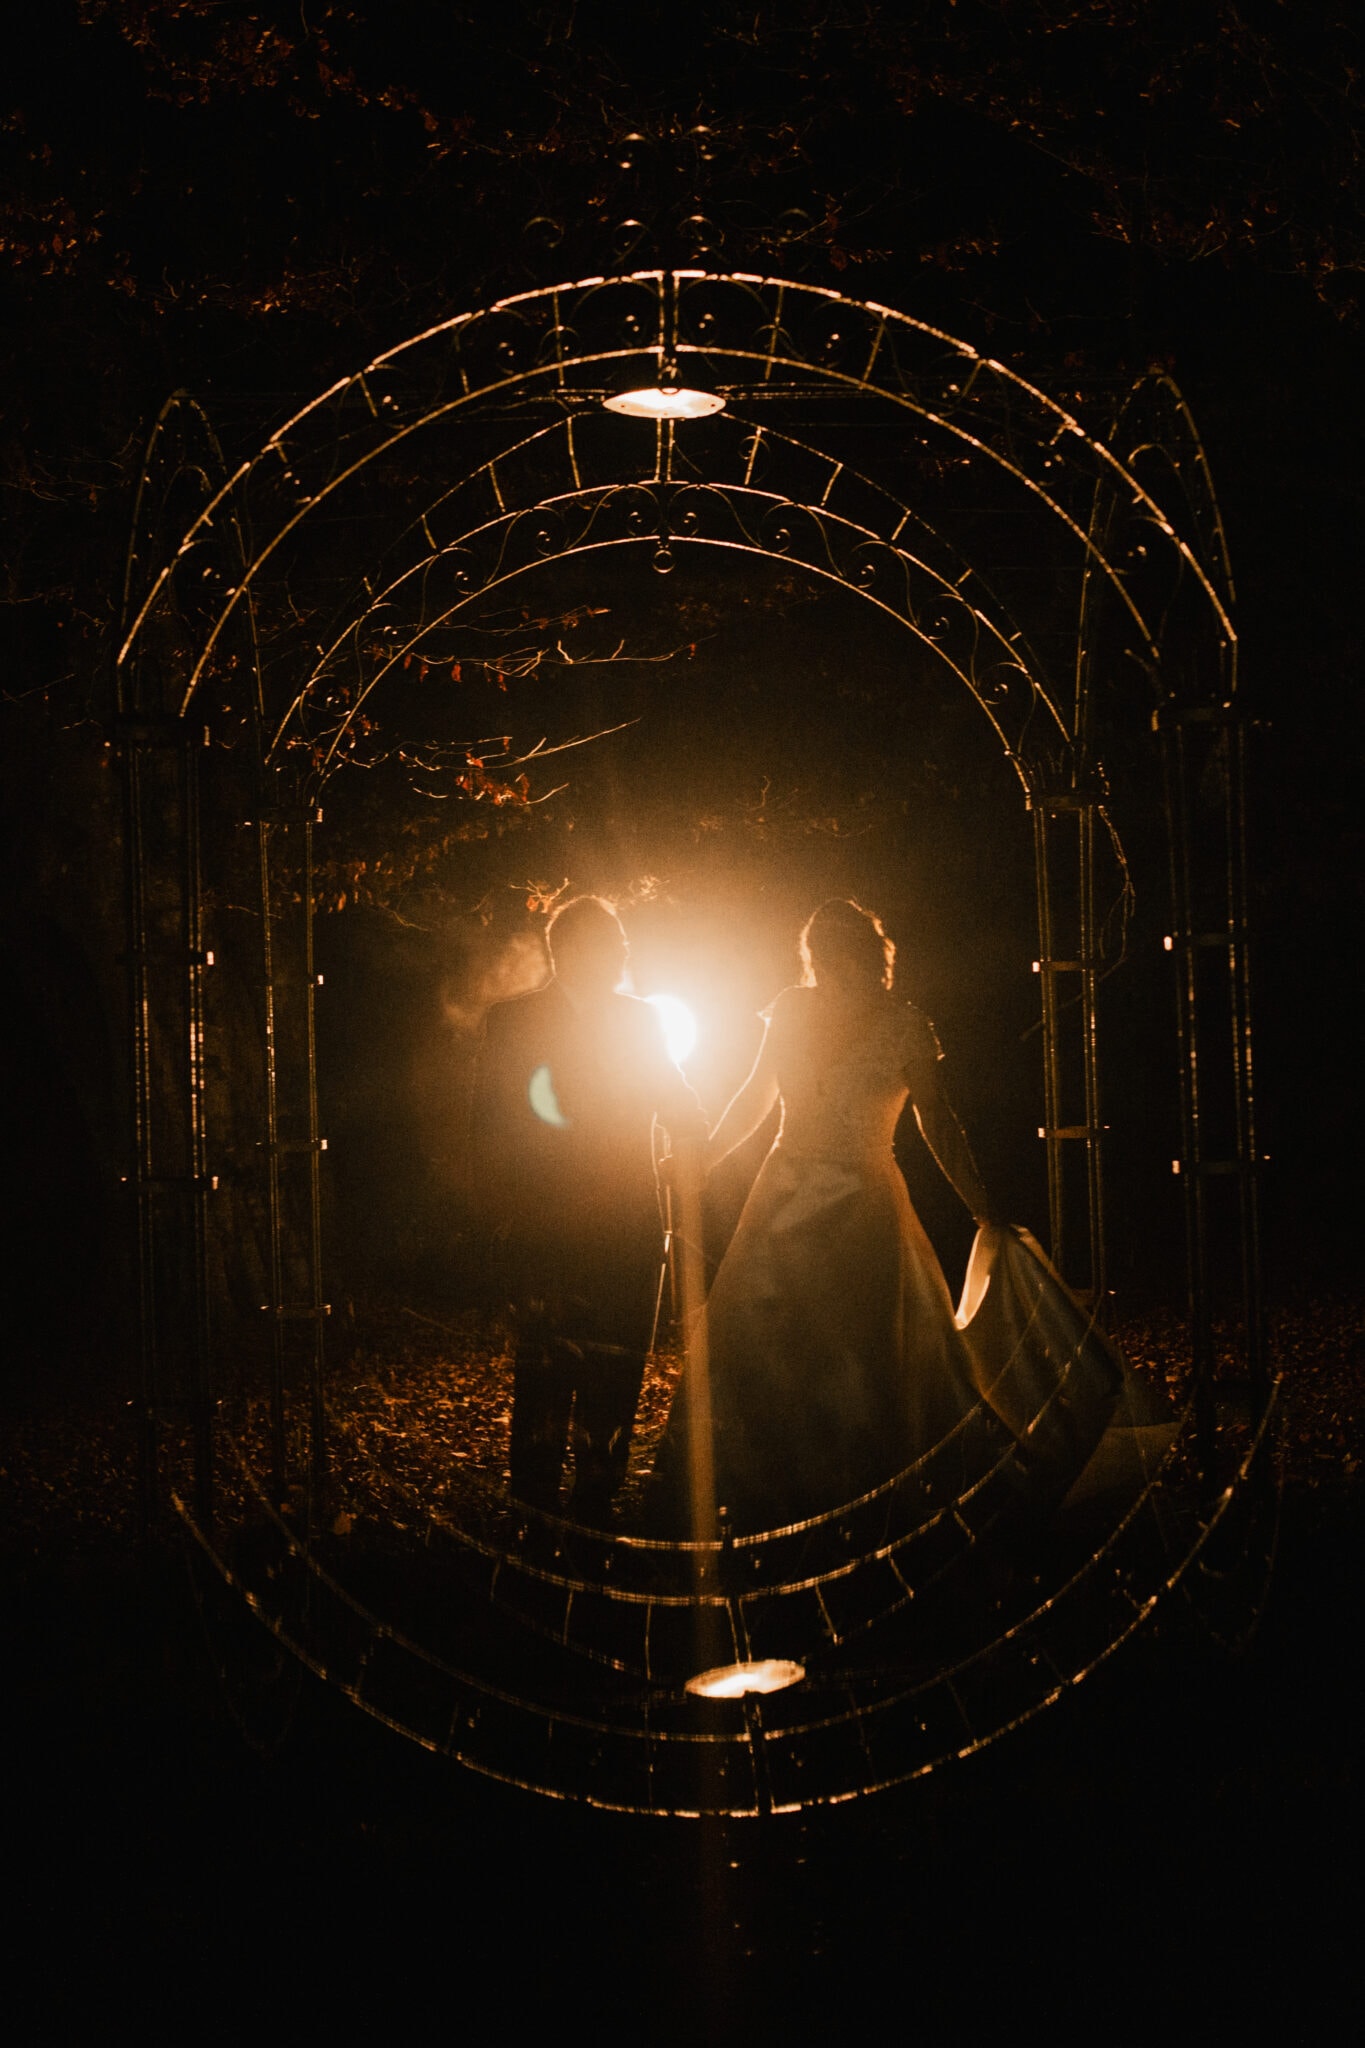 A couple walks through an ornate metal archway at night, illuminated from behind by a bright light that casts a warm glow around them.